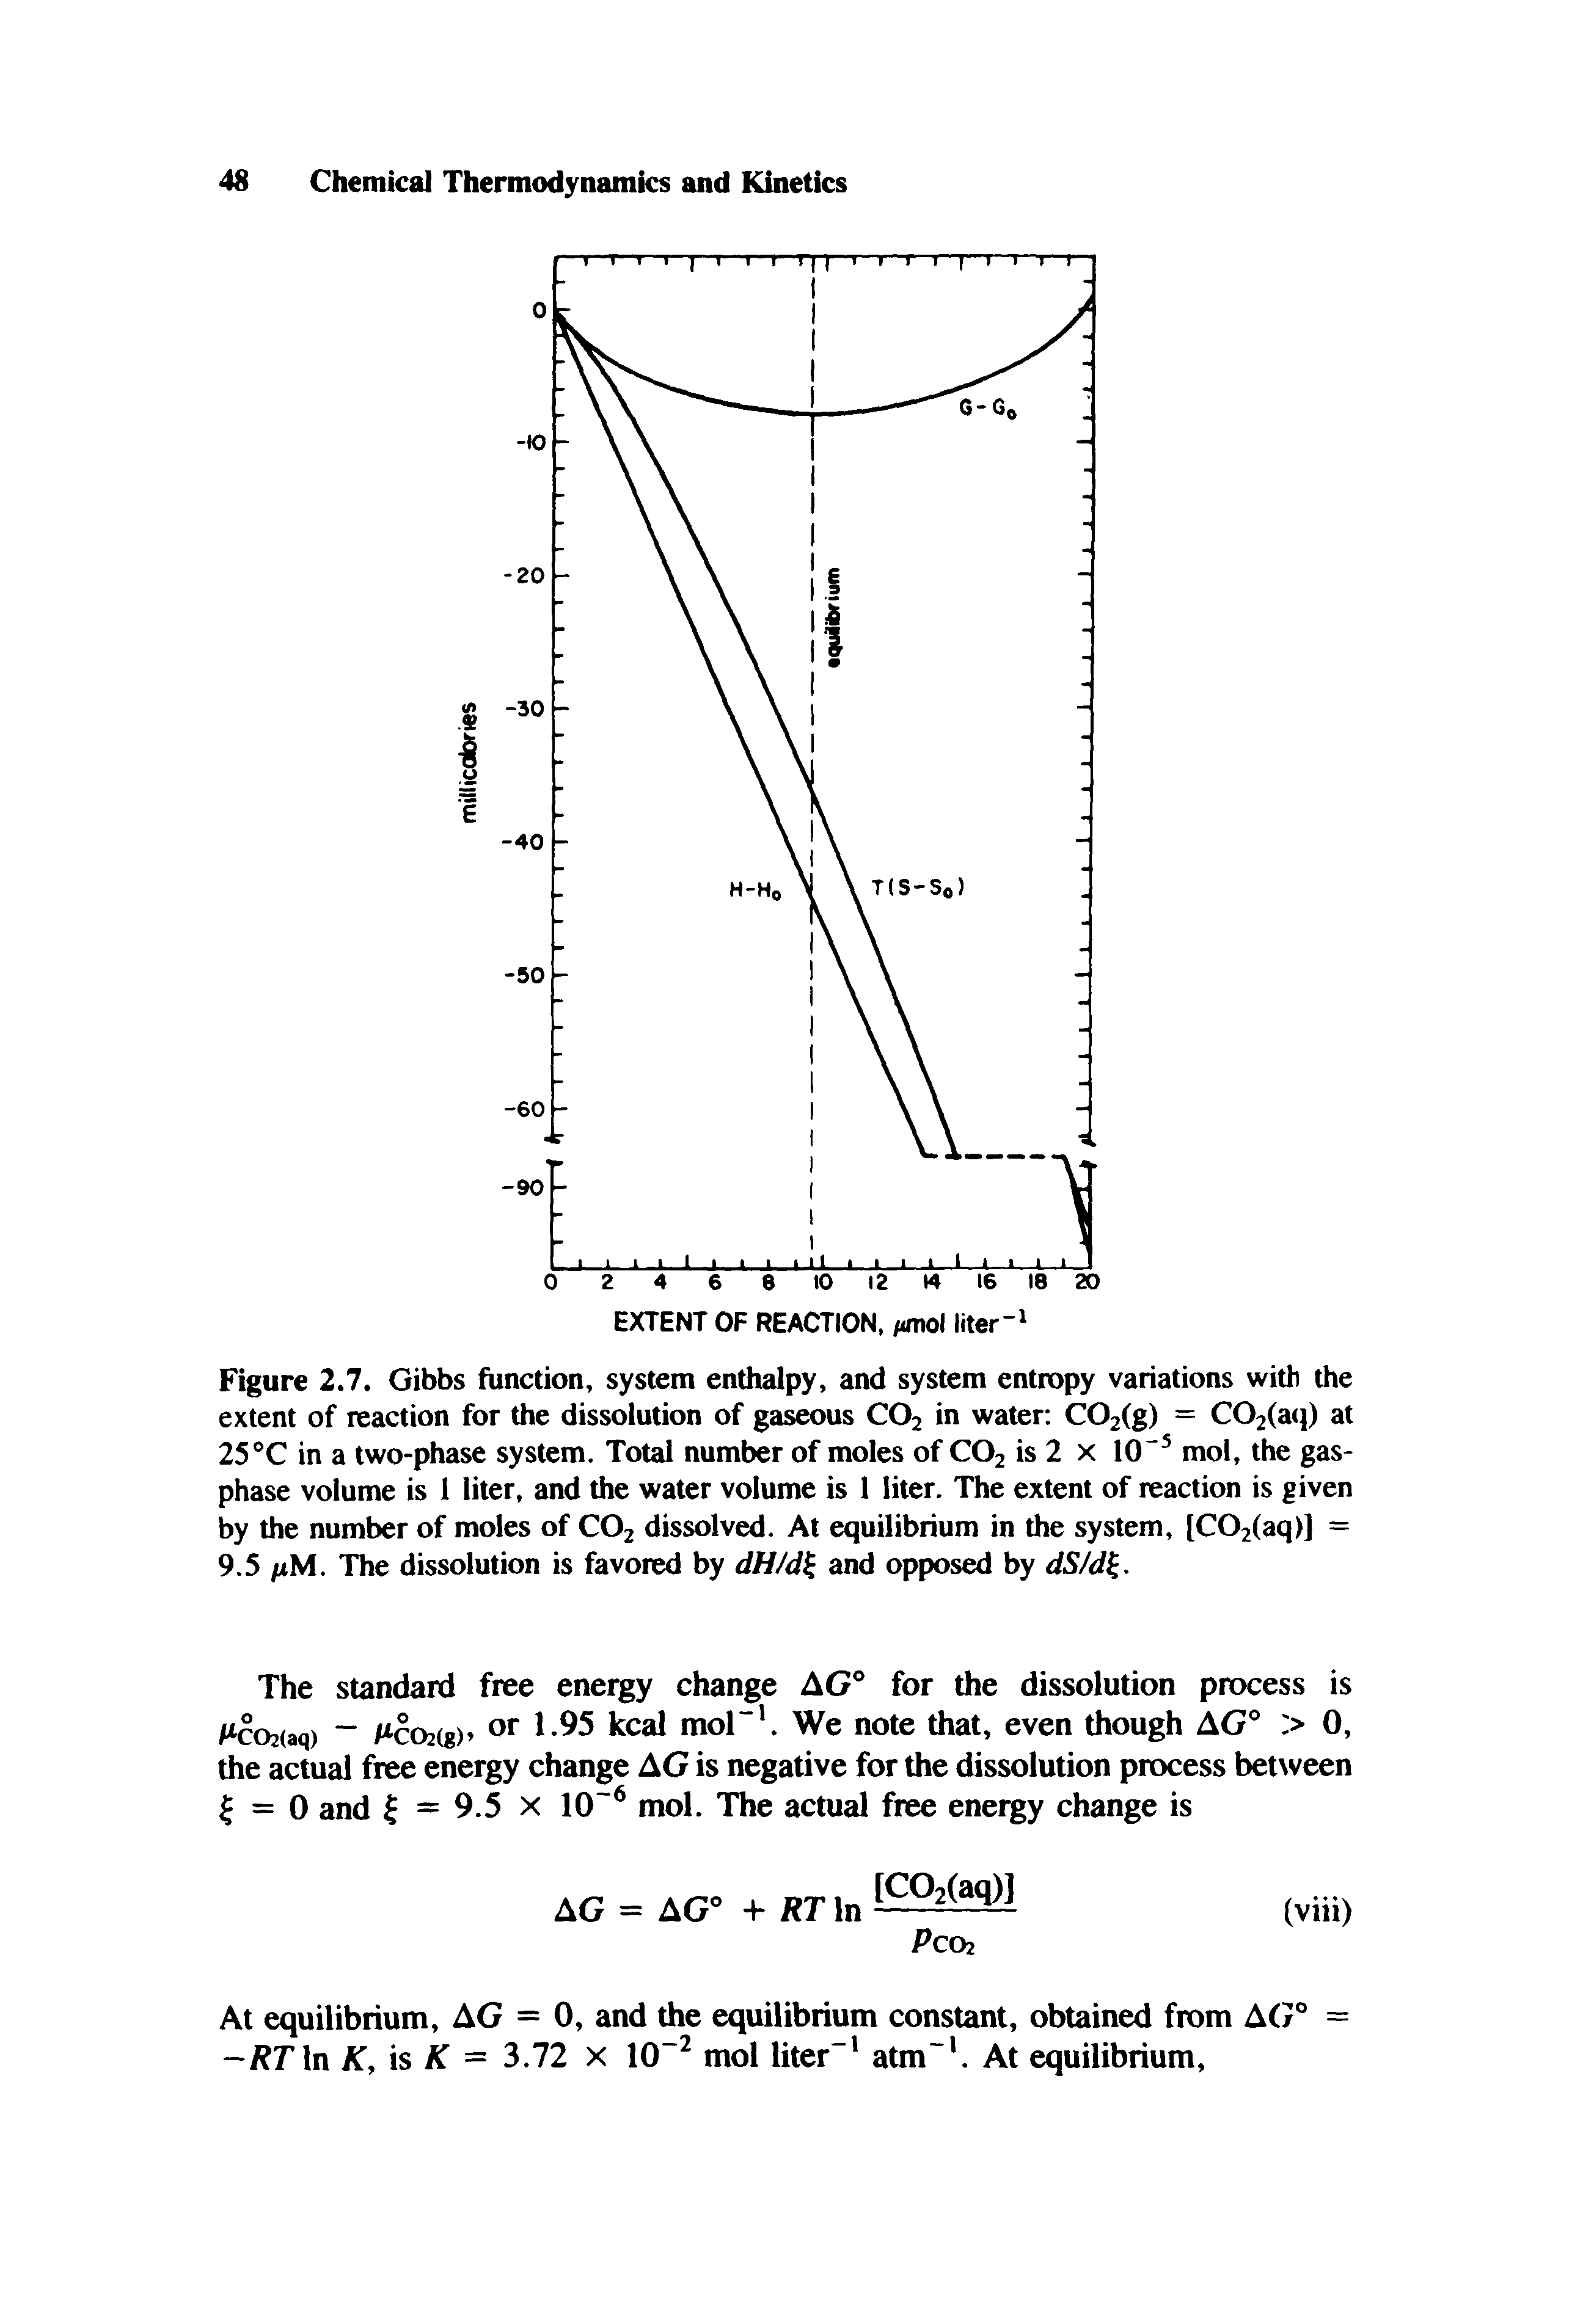 Figure 2.7. Gibbs function, system enthalpy, and system entropy variations with the extent of reaction for the dissolution of gaseous CO2 in water C02(g) = C02(a<i) at 25 °C in a two-phase system. Total number of moles of CO2 is 2 x 10 mol, the gas-phase volume is 1 liter, and the water volume is 1 liter. The extent of reaction is given by the number of moles of CO2 dissolved. At equilibrium in the system, [C02(aq)J = 9.5 lilA. The dissolution is favored by dH/d and opposed by dS/d. ...